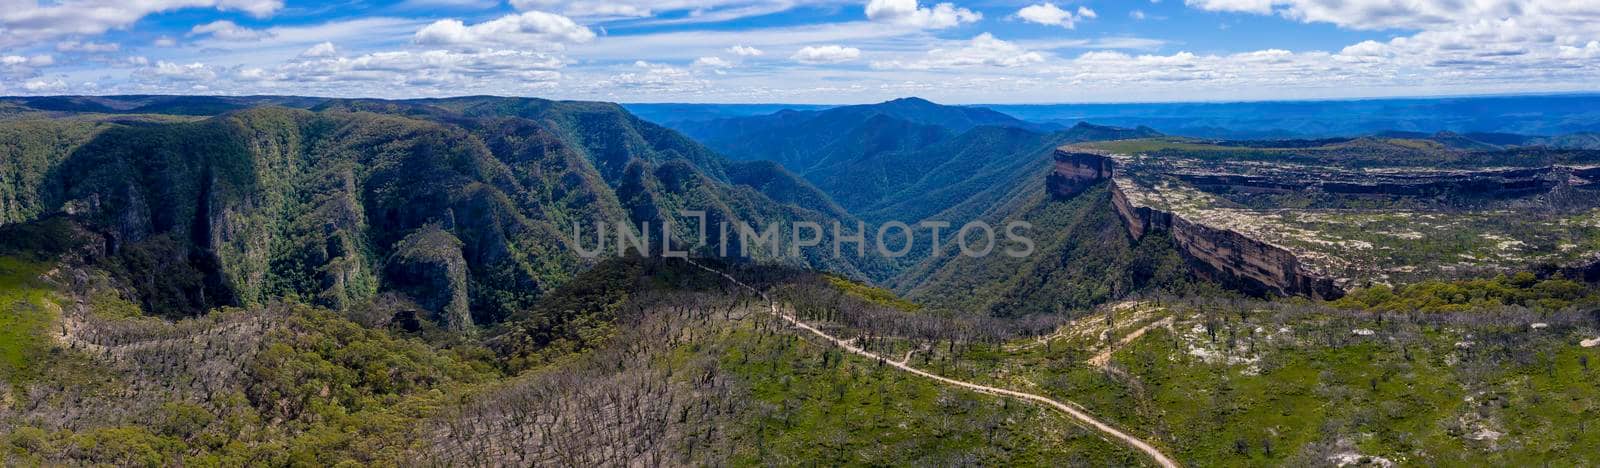 Aerial panorama of Kanangra Walls and Mount Cloud Maker in Kanangra-Boyd National Park in the Central Tablelands in regional New South Wales Australia